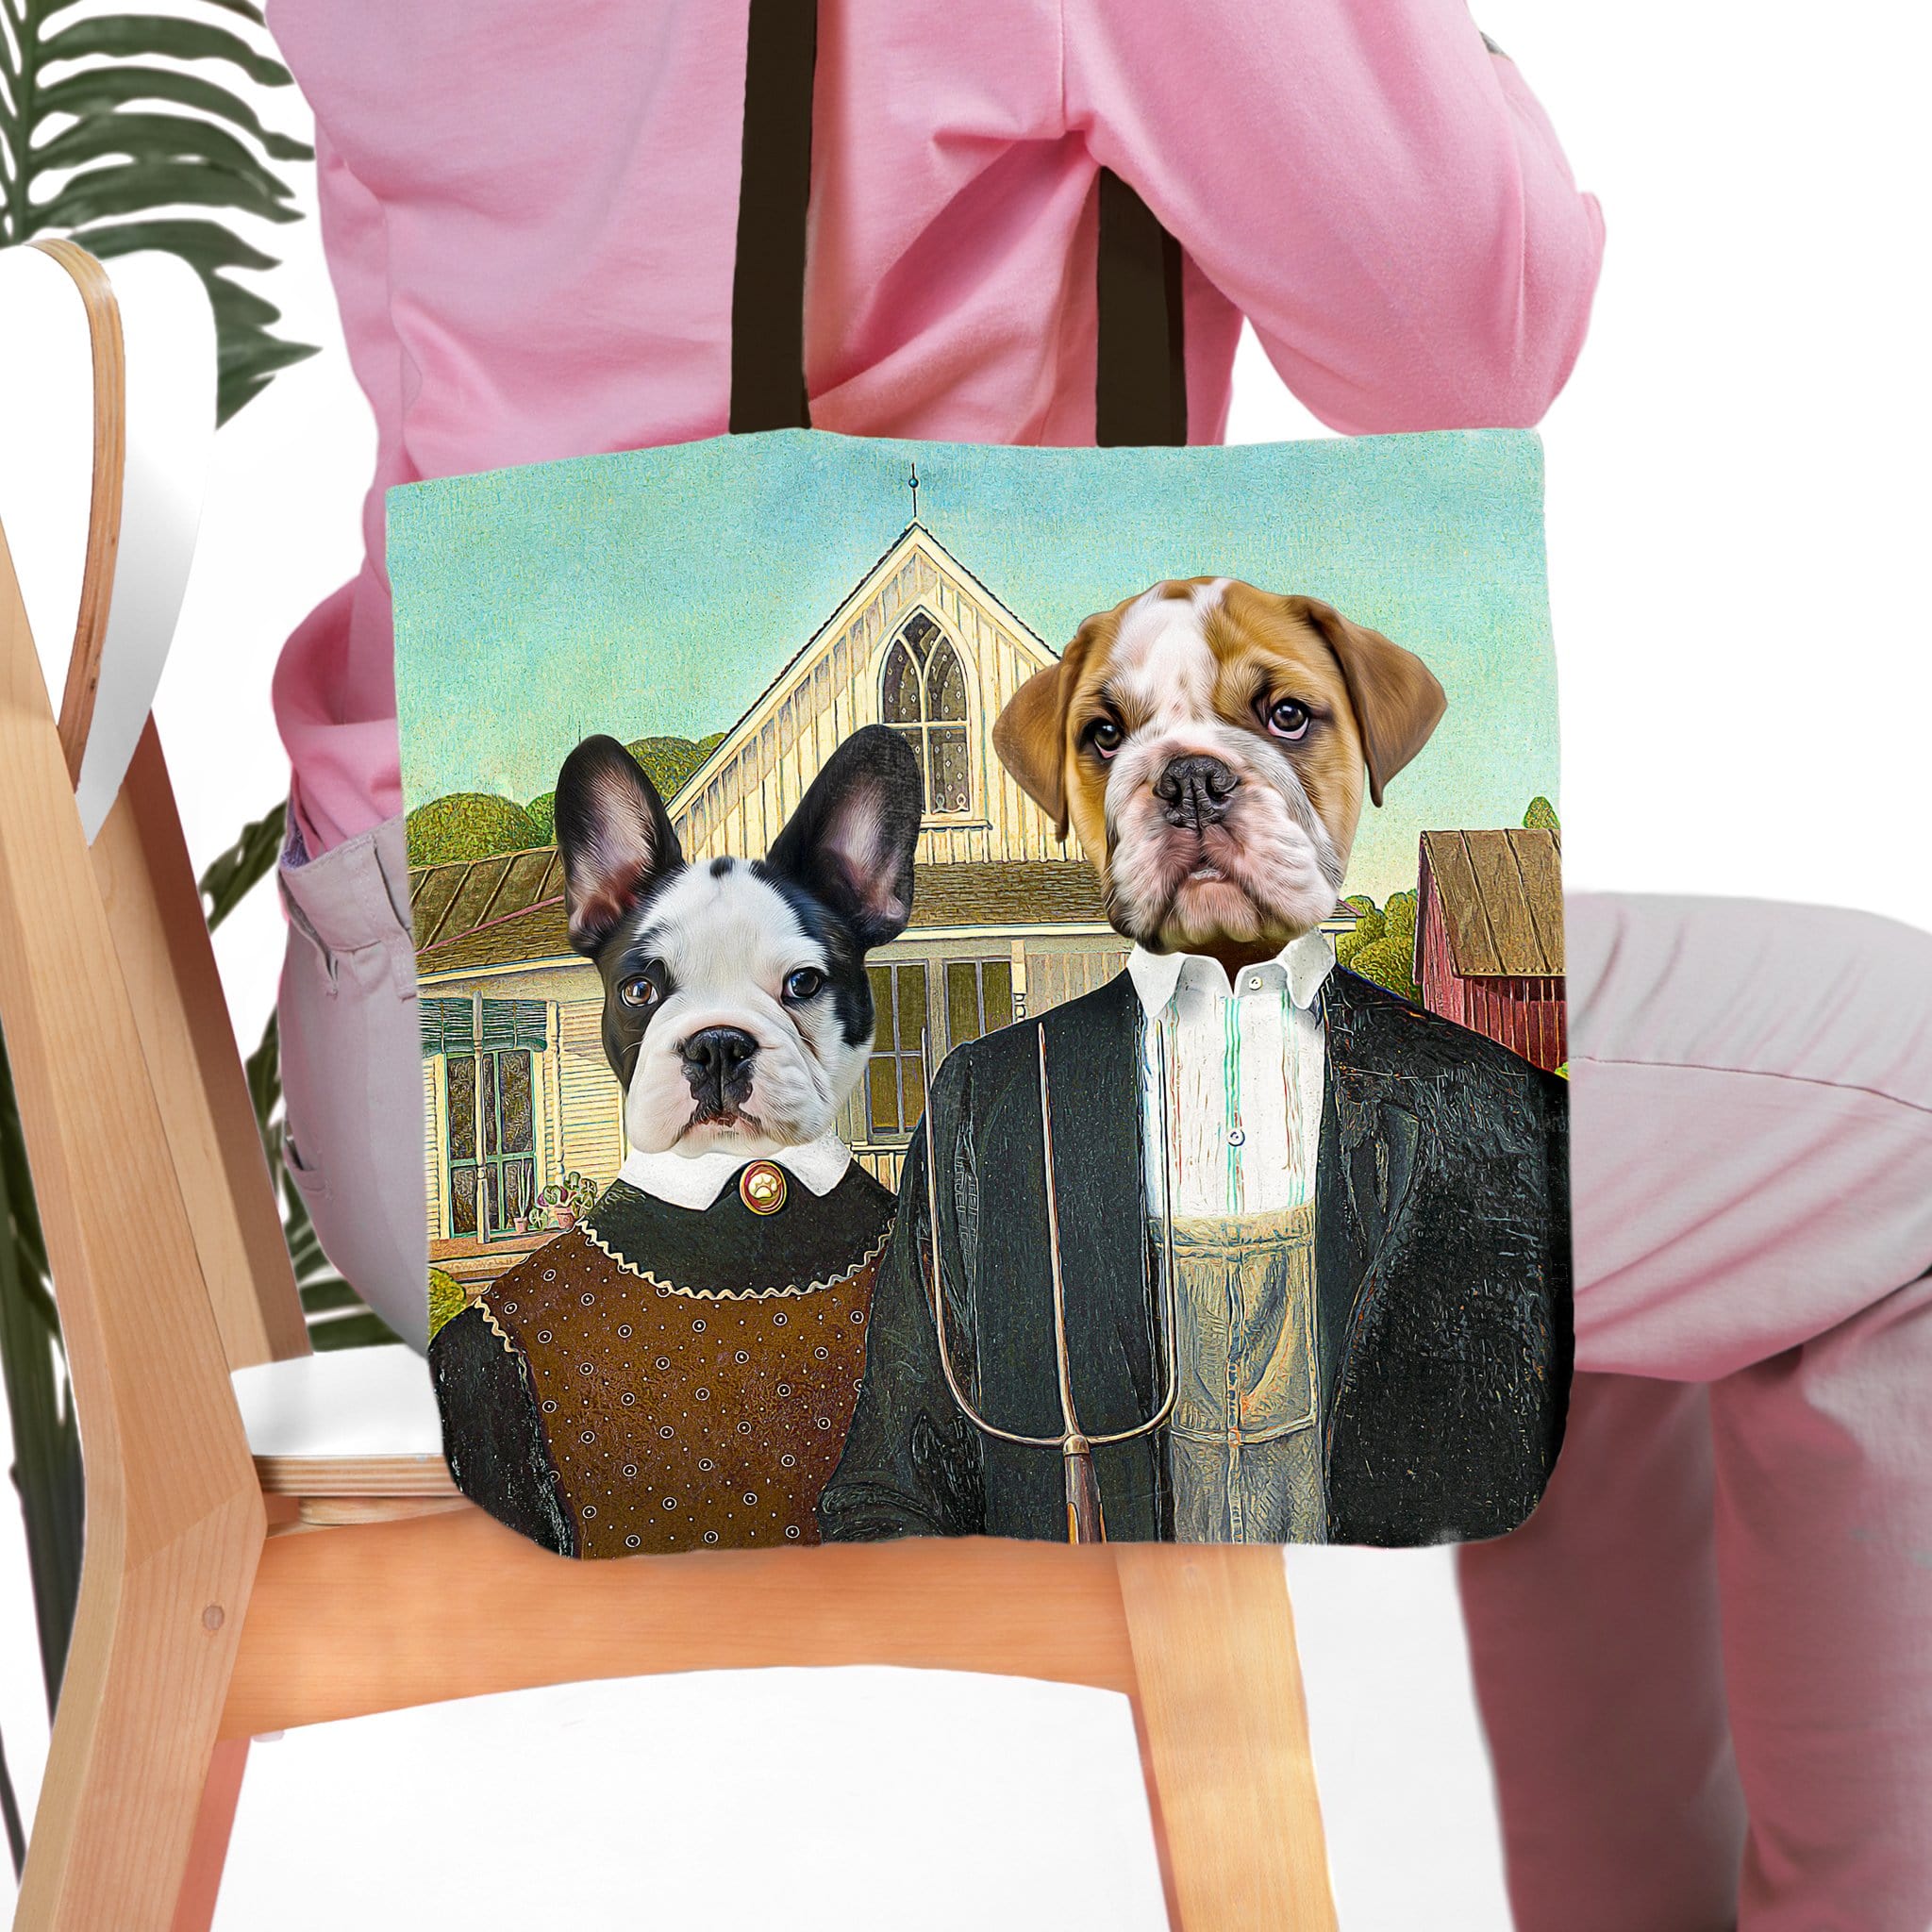 &#39;American Pawthic&#39; Personalized 2 Pet Tote Bag